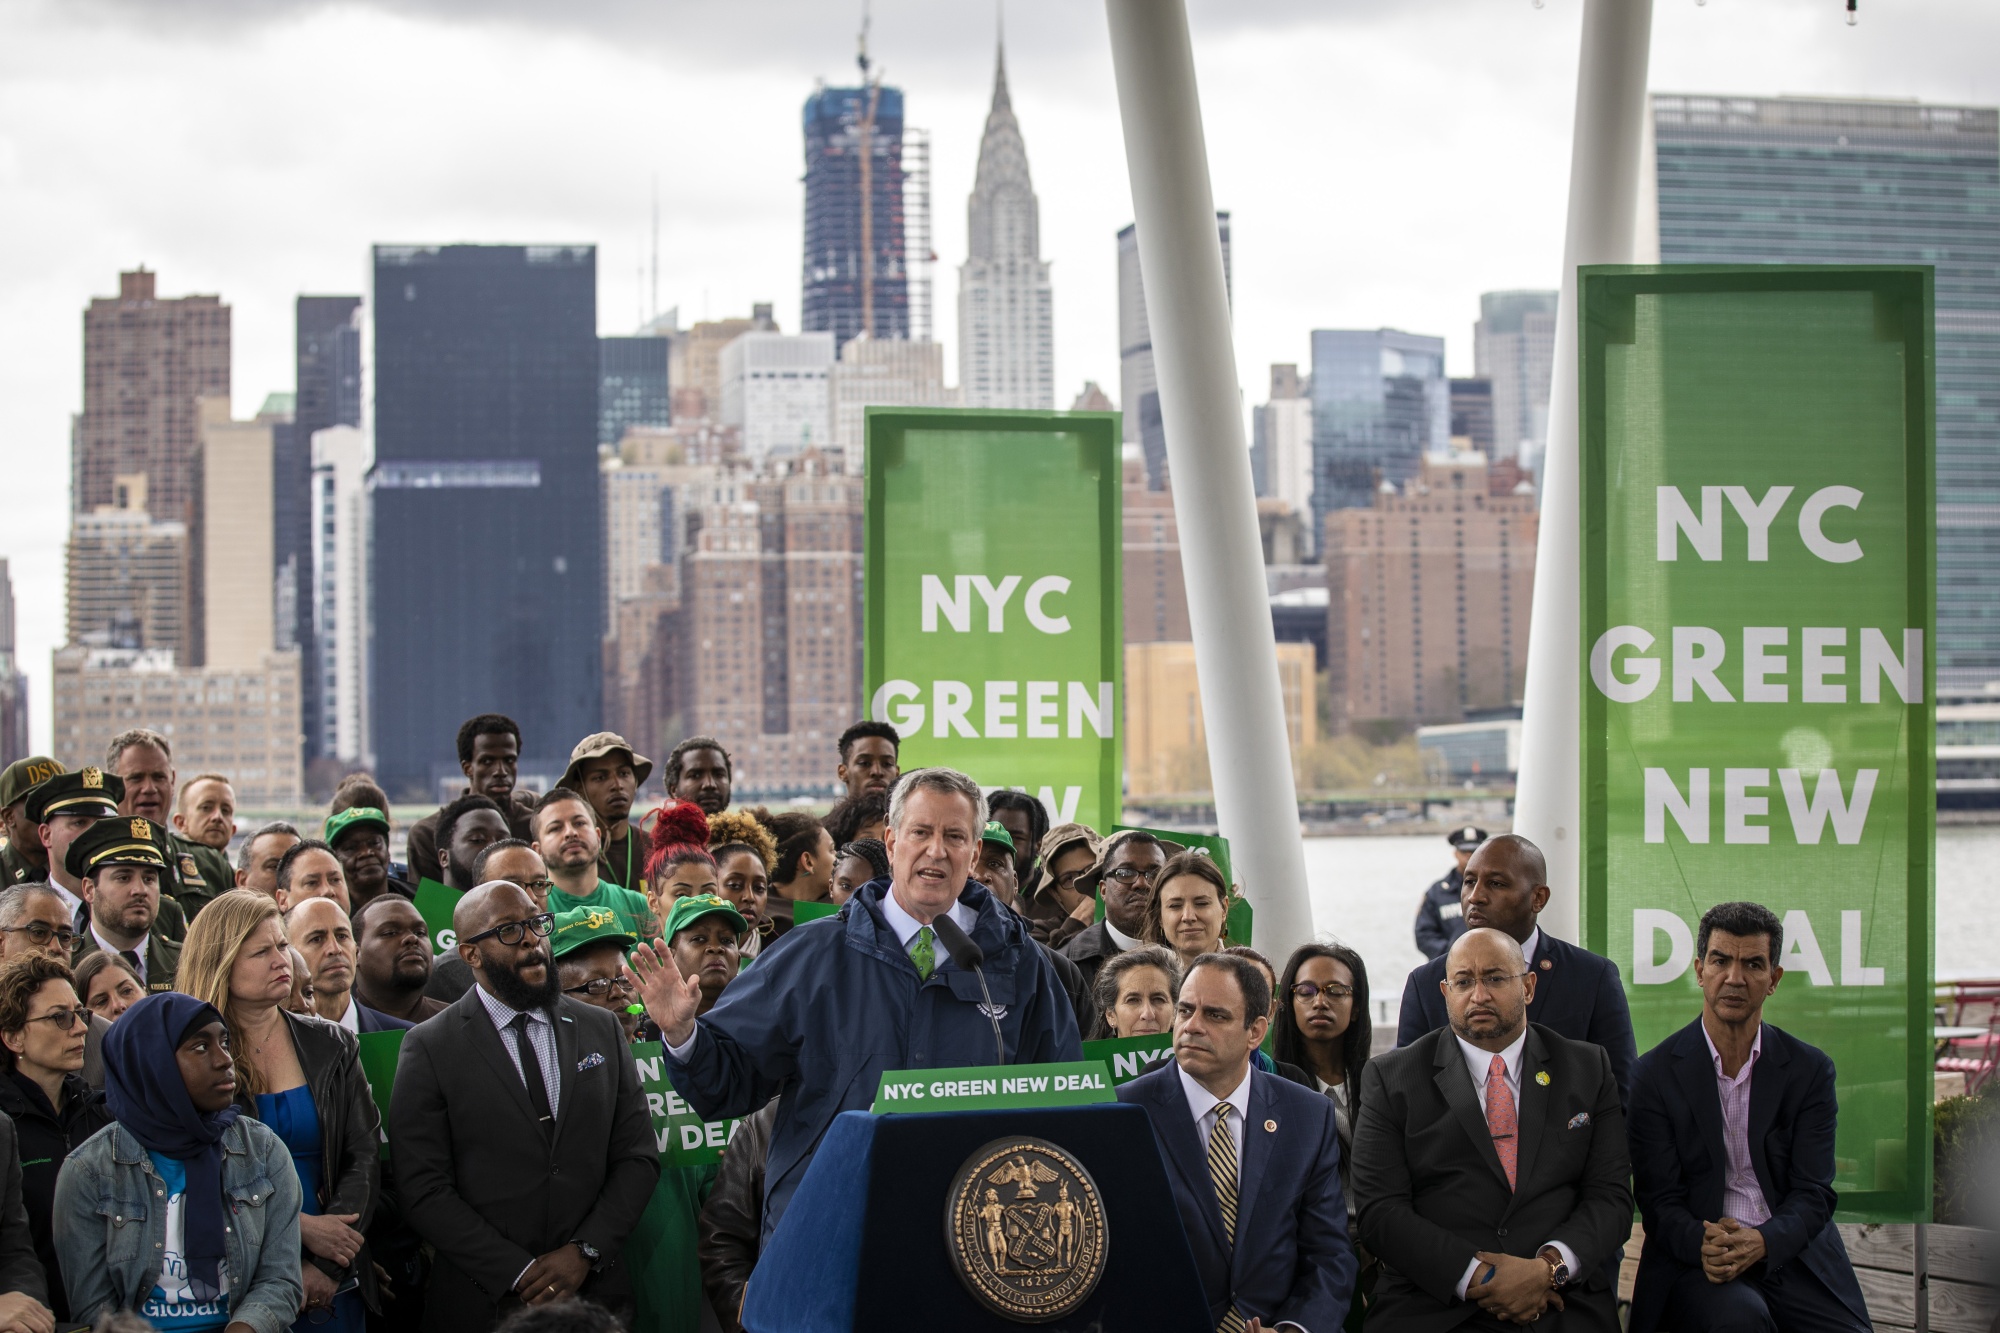 New York City Mayor Bill de Blasio speaks about the city's strategy to respond to climate change at Hunters Point South Park on&nbsp;April 22, 2019. New York still has a long way to go to meet its emissions reduction targets.&nbsp;